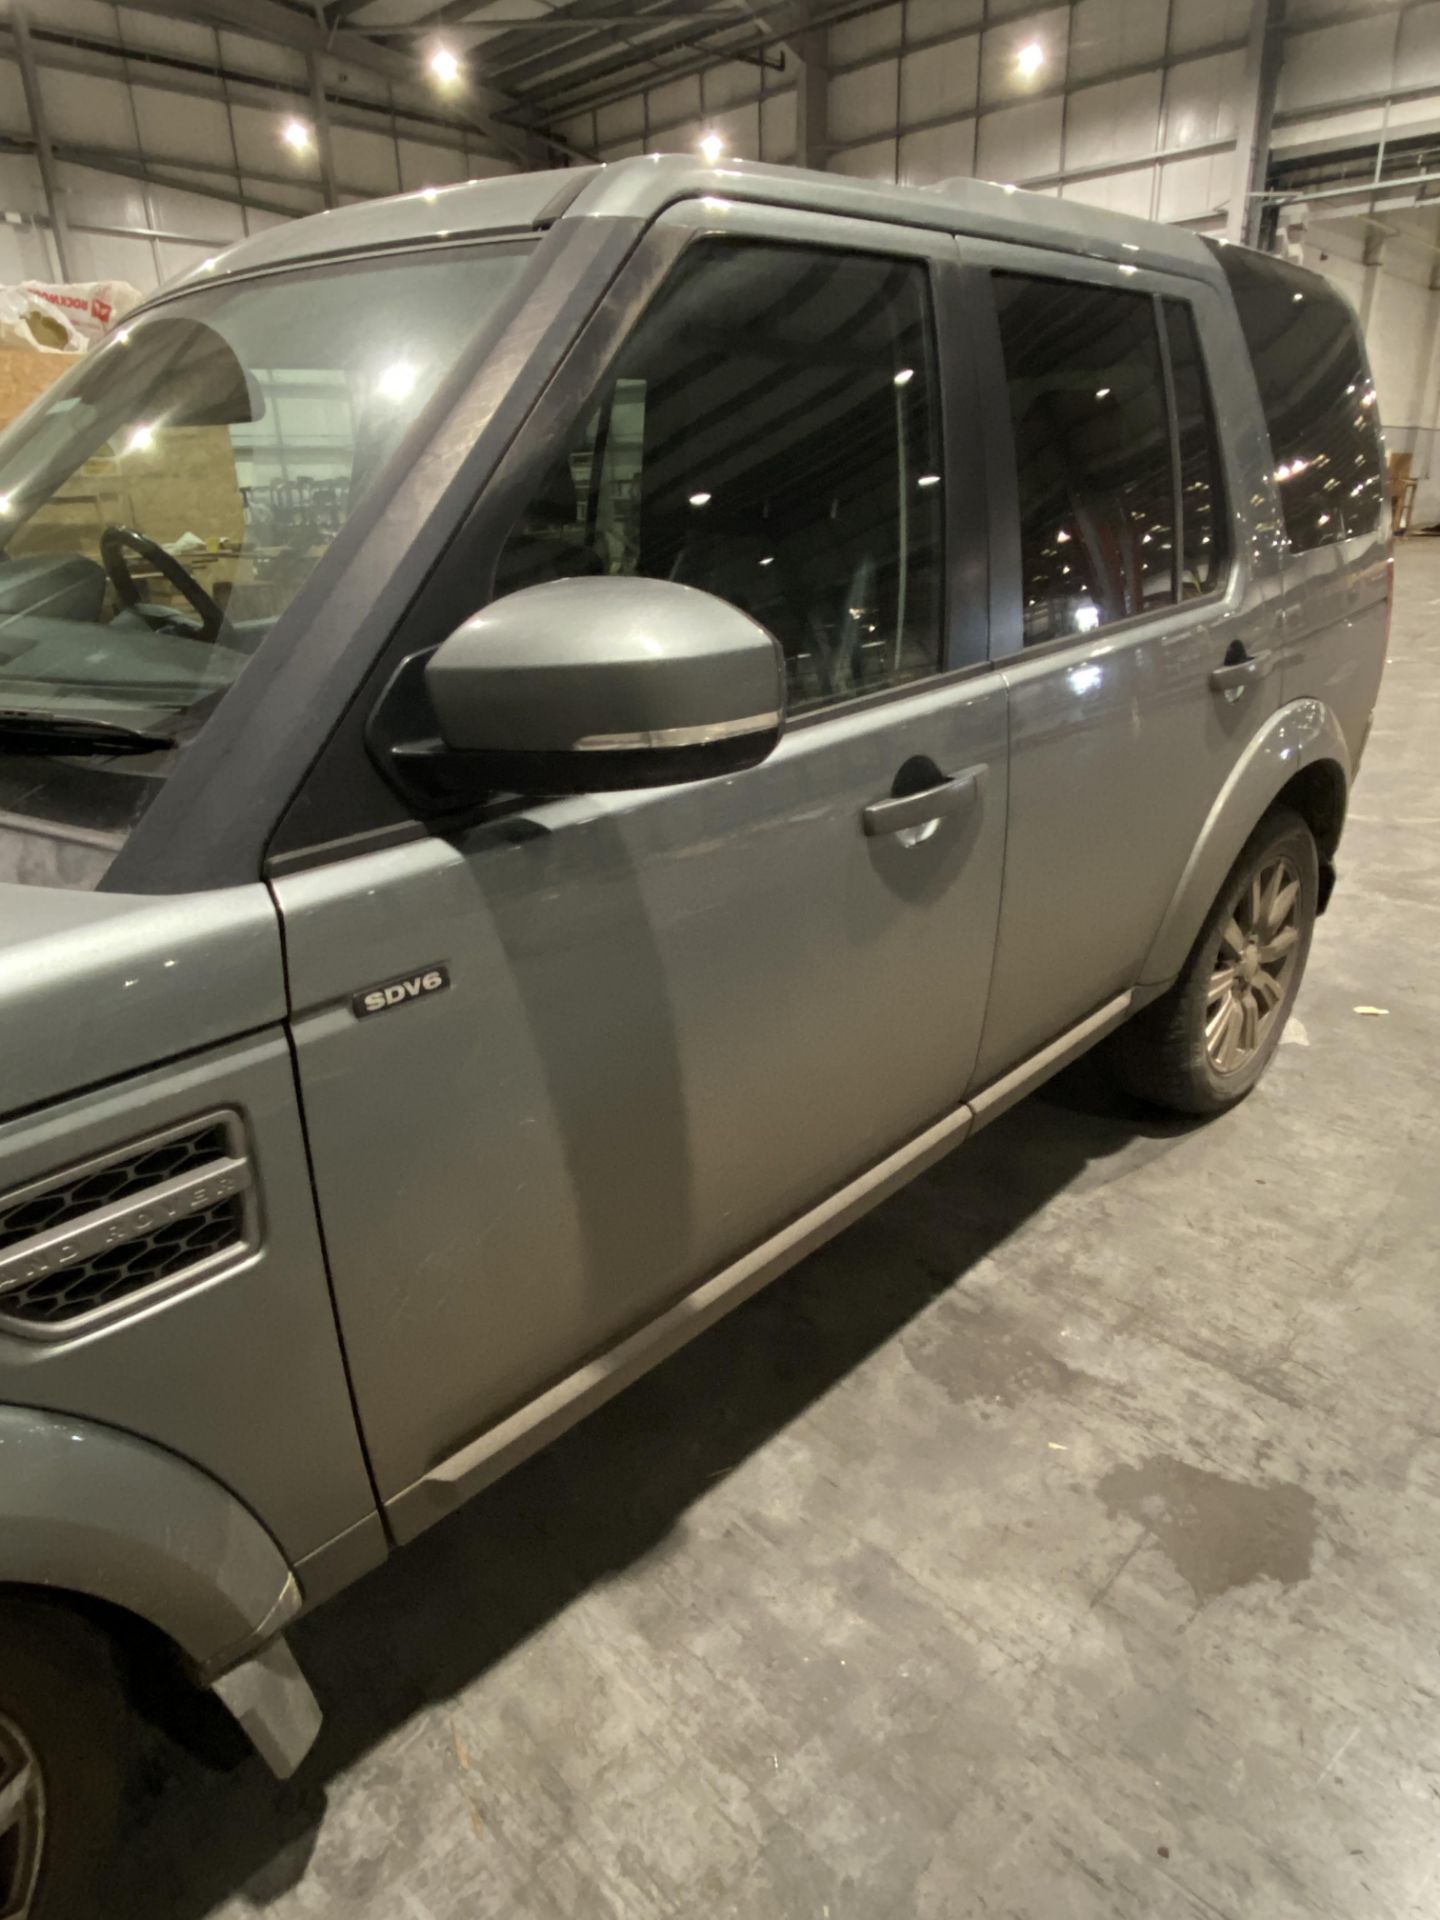 Land Rover Discovery XS SDV8 Auto - Image 3 of 15